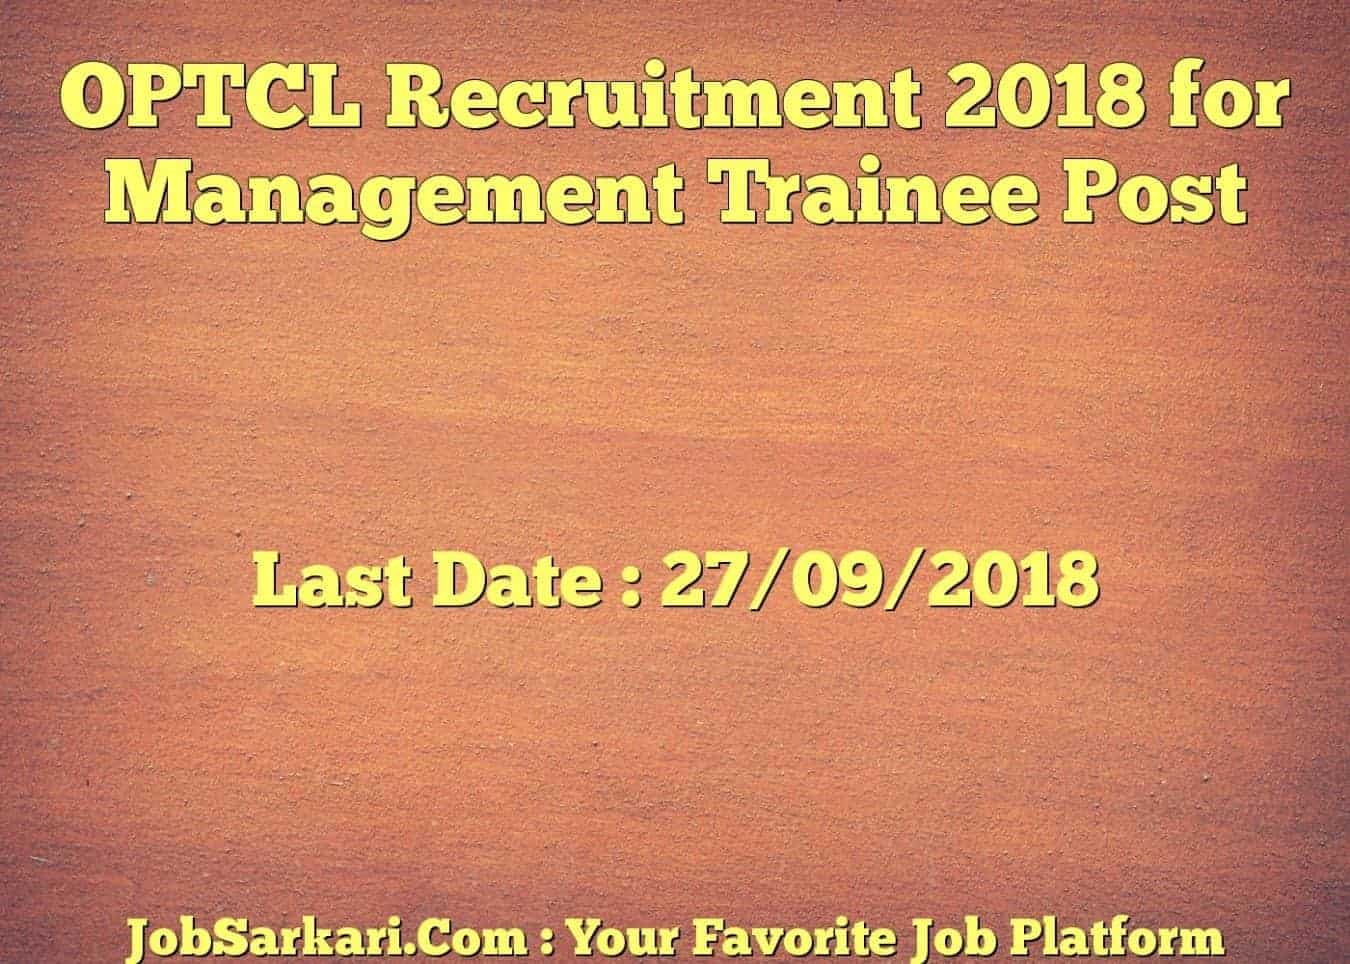 OPTCL Recruitment 2018 for Management Trainee Post